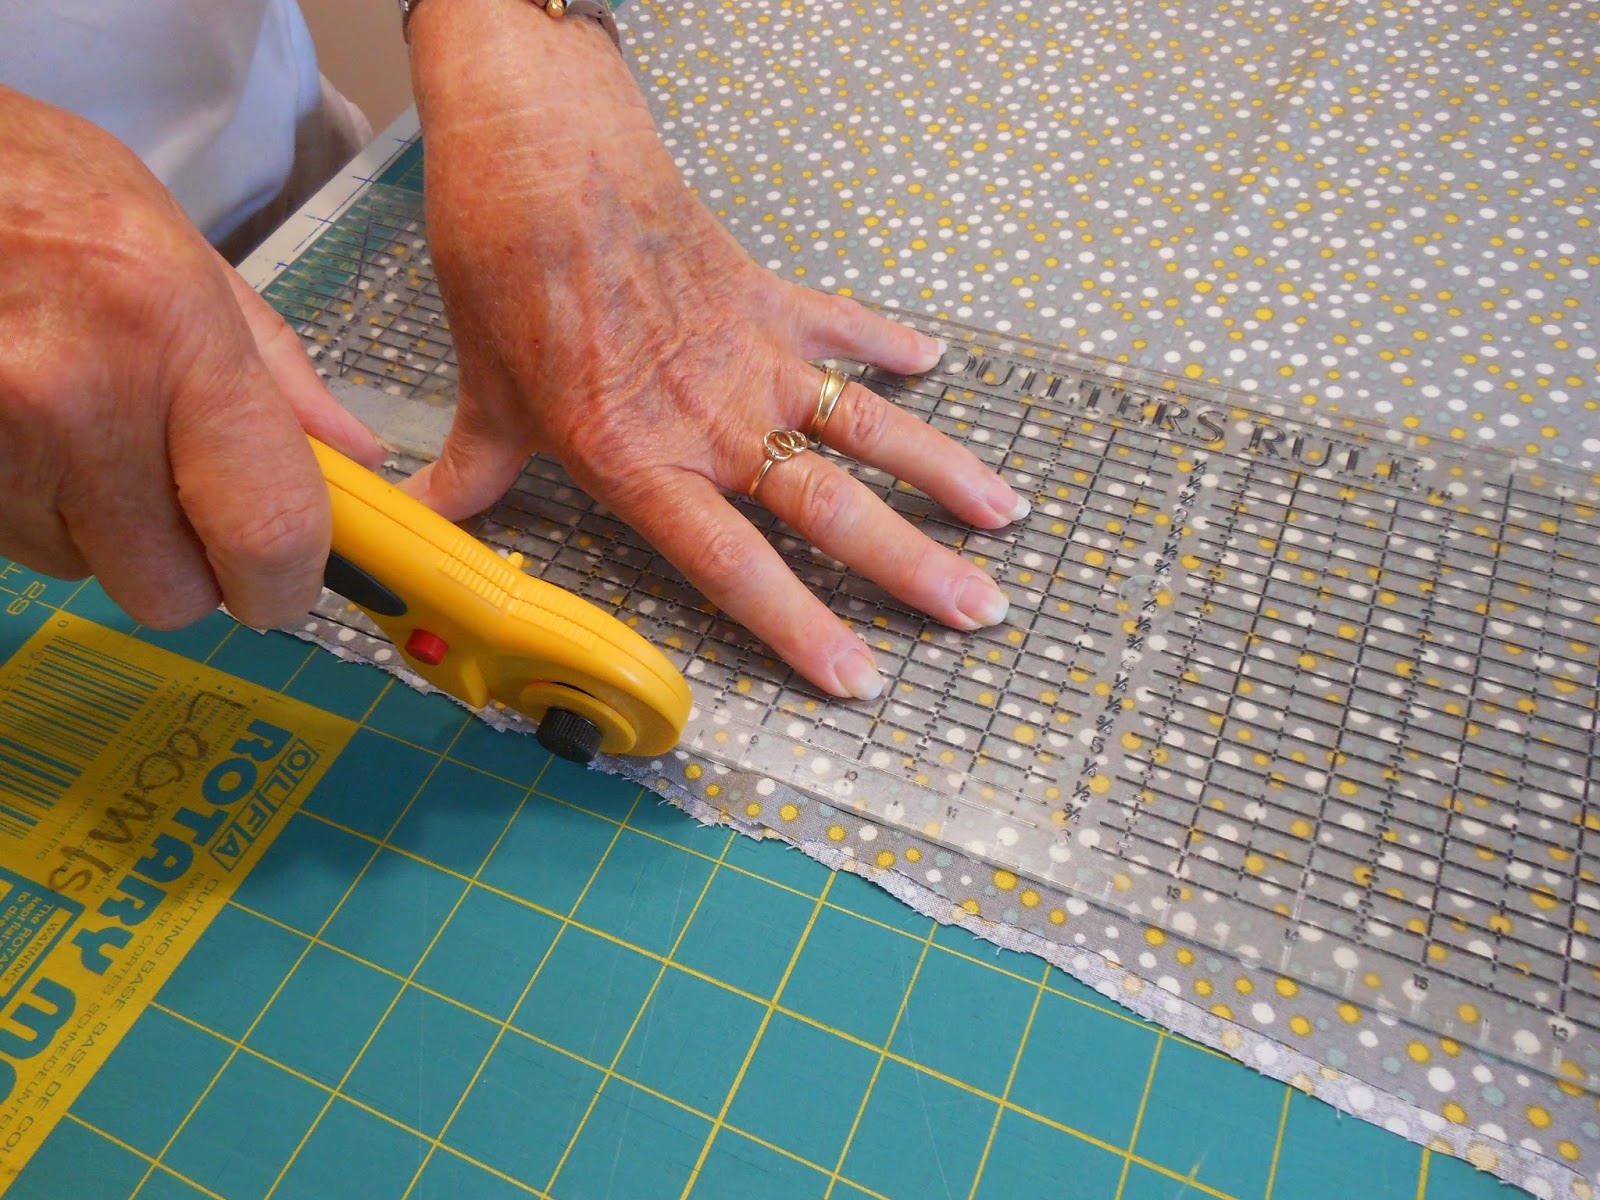 Quilting for Beginners: Using a Rotary Cutter